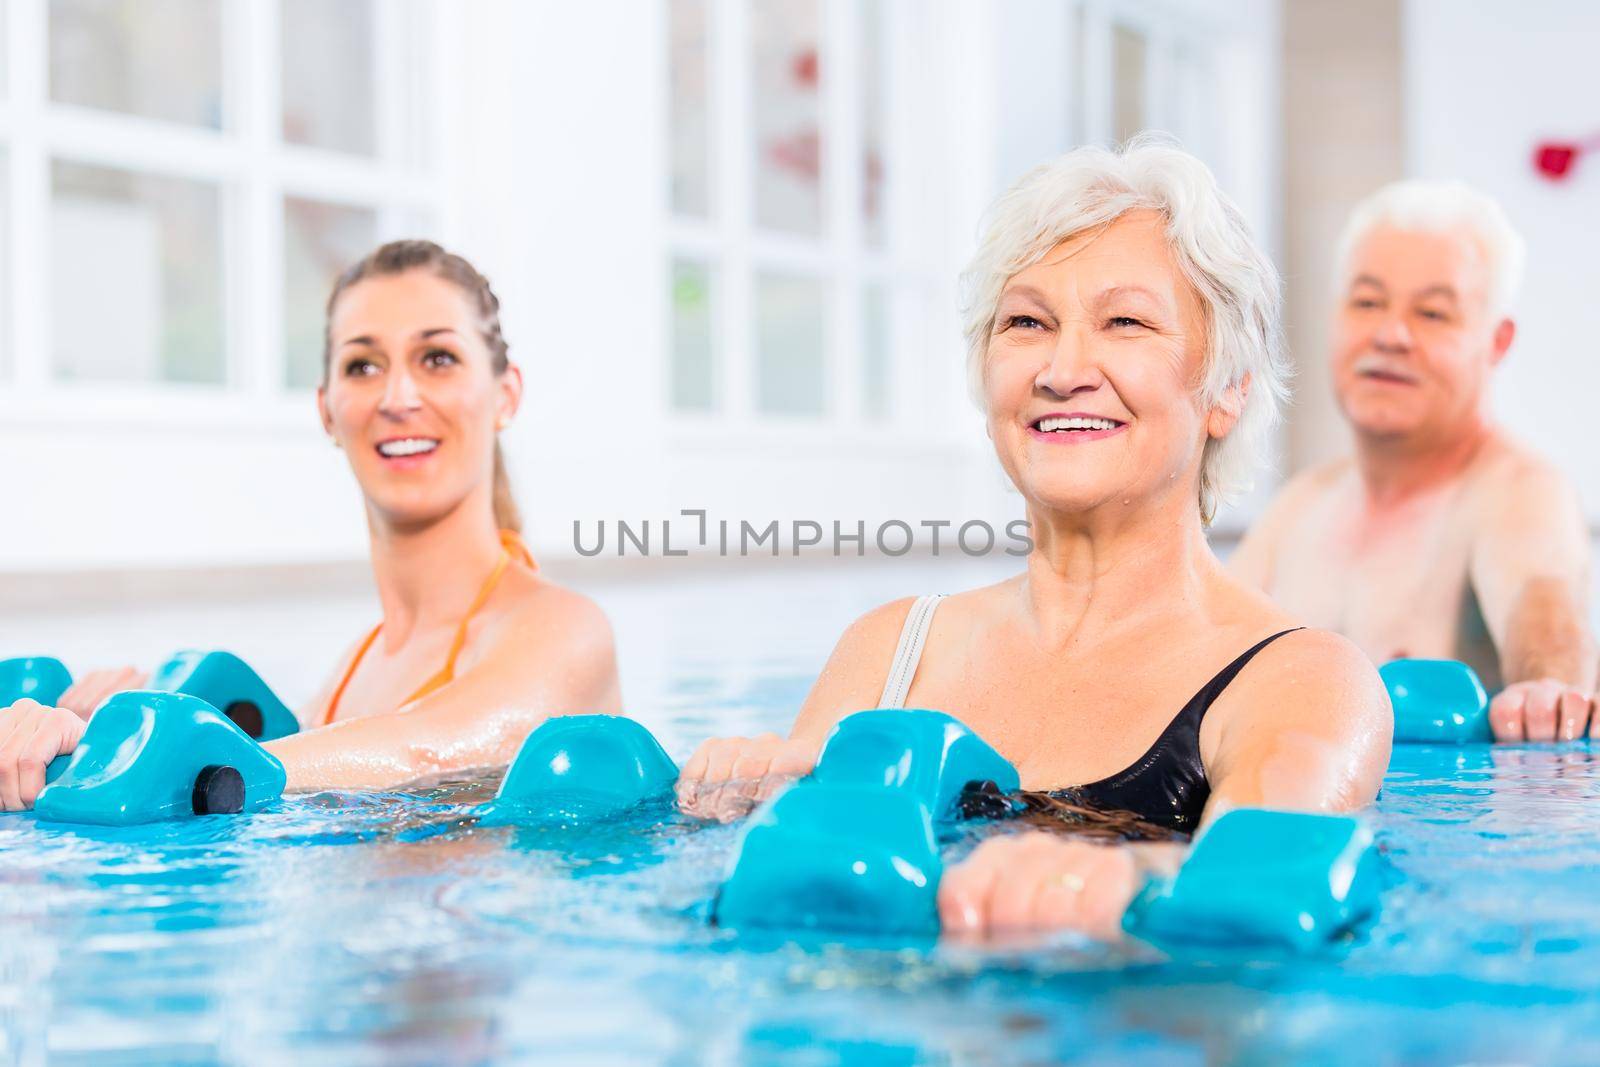 People at water gymnastics in physiotherapy by Kzenon